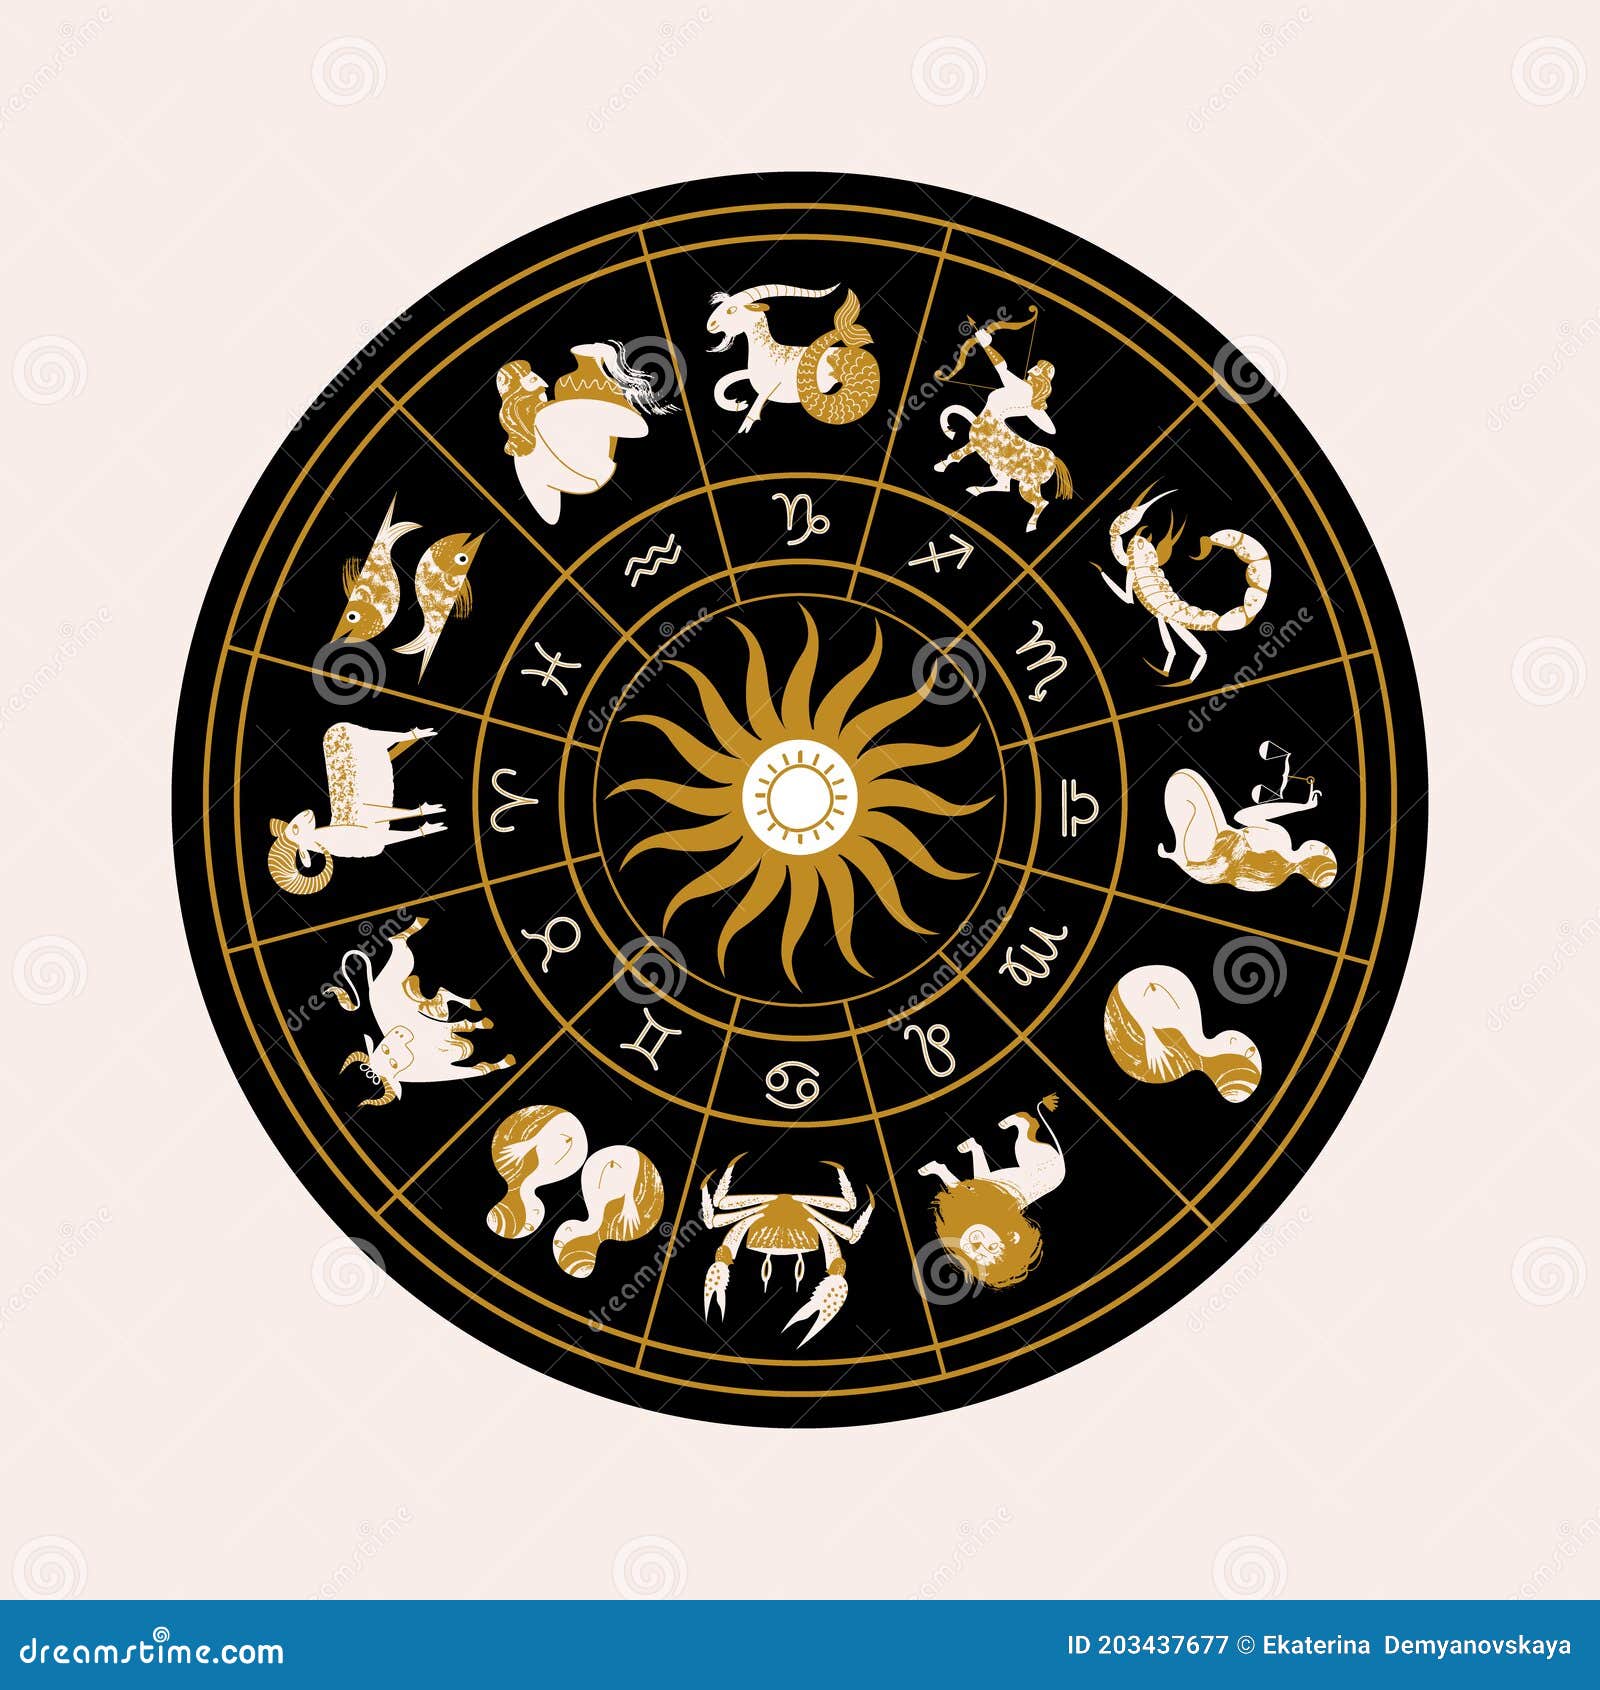 Horoscope and Astrology. Horoscope Wheel with the Twelve Signs of the ...